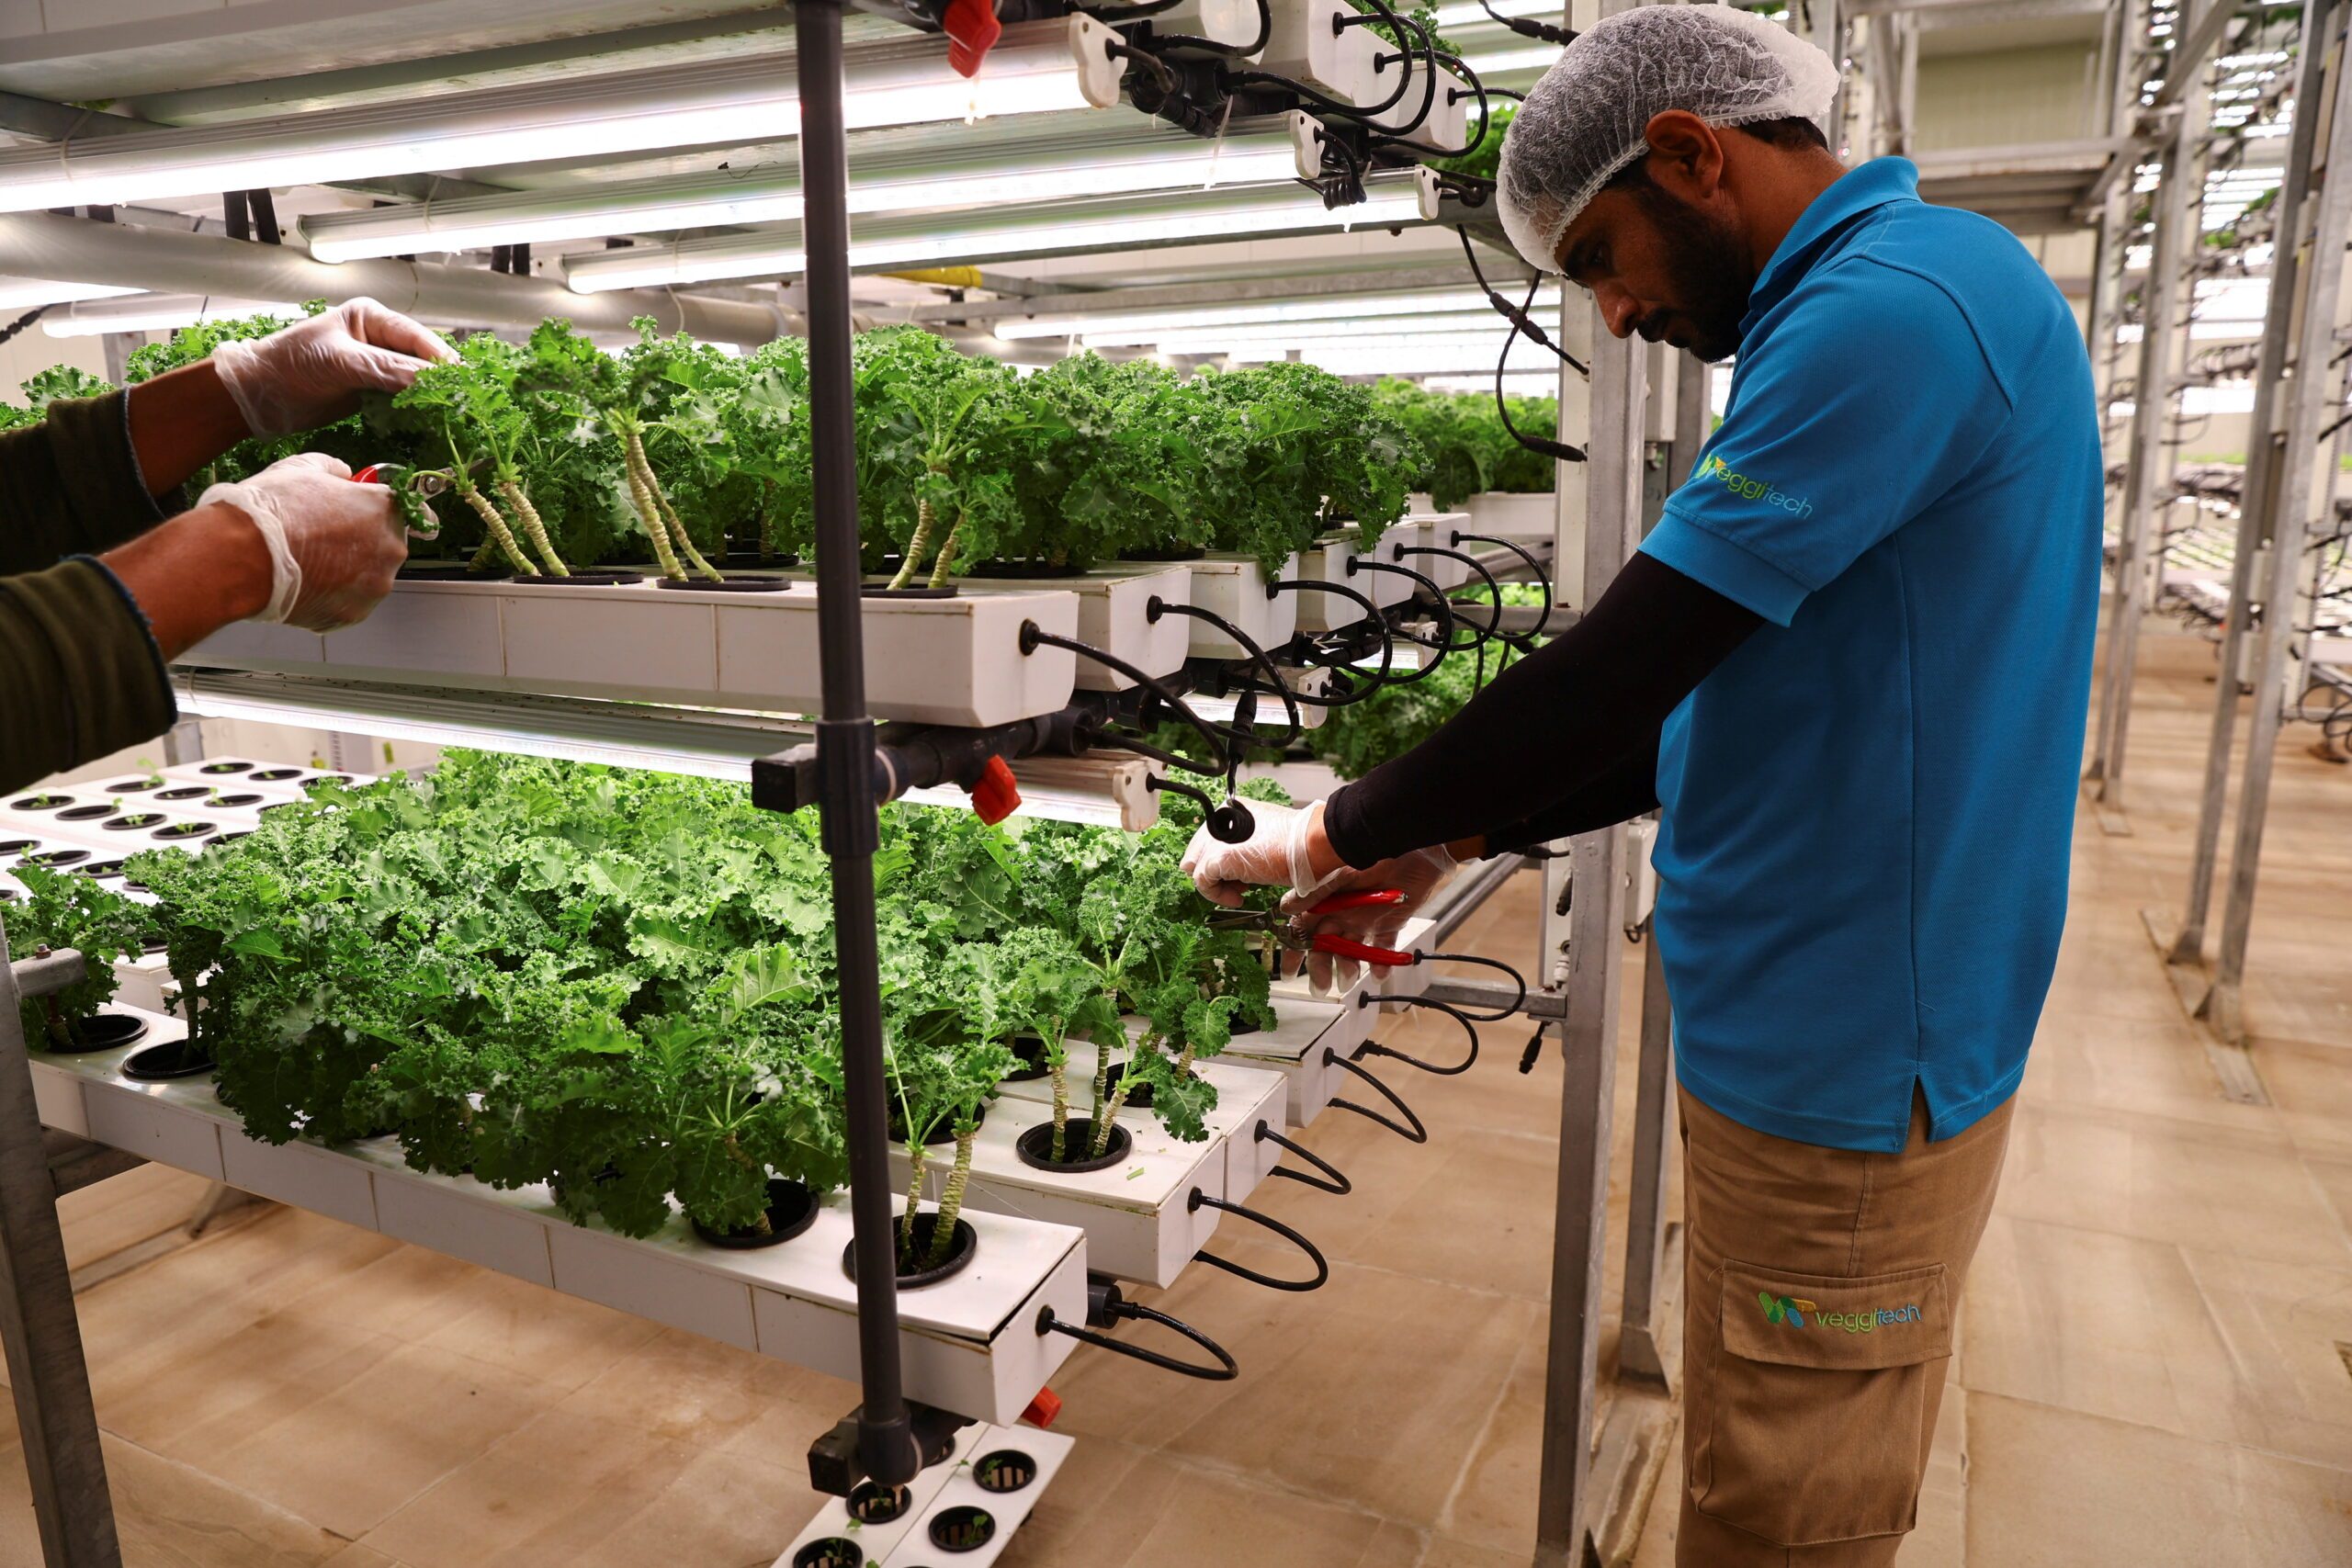 Workers harvest baby kale grown at the vertical nutrient film technique (NFT) system at Veggitech, a start-up farm, that produces all year-round crops using smart and sustainable farming technologies in the middle of UAE's Sharjah desert, in Sharjah, United Arab Emirates,